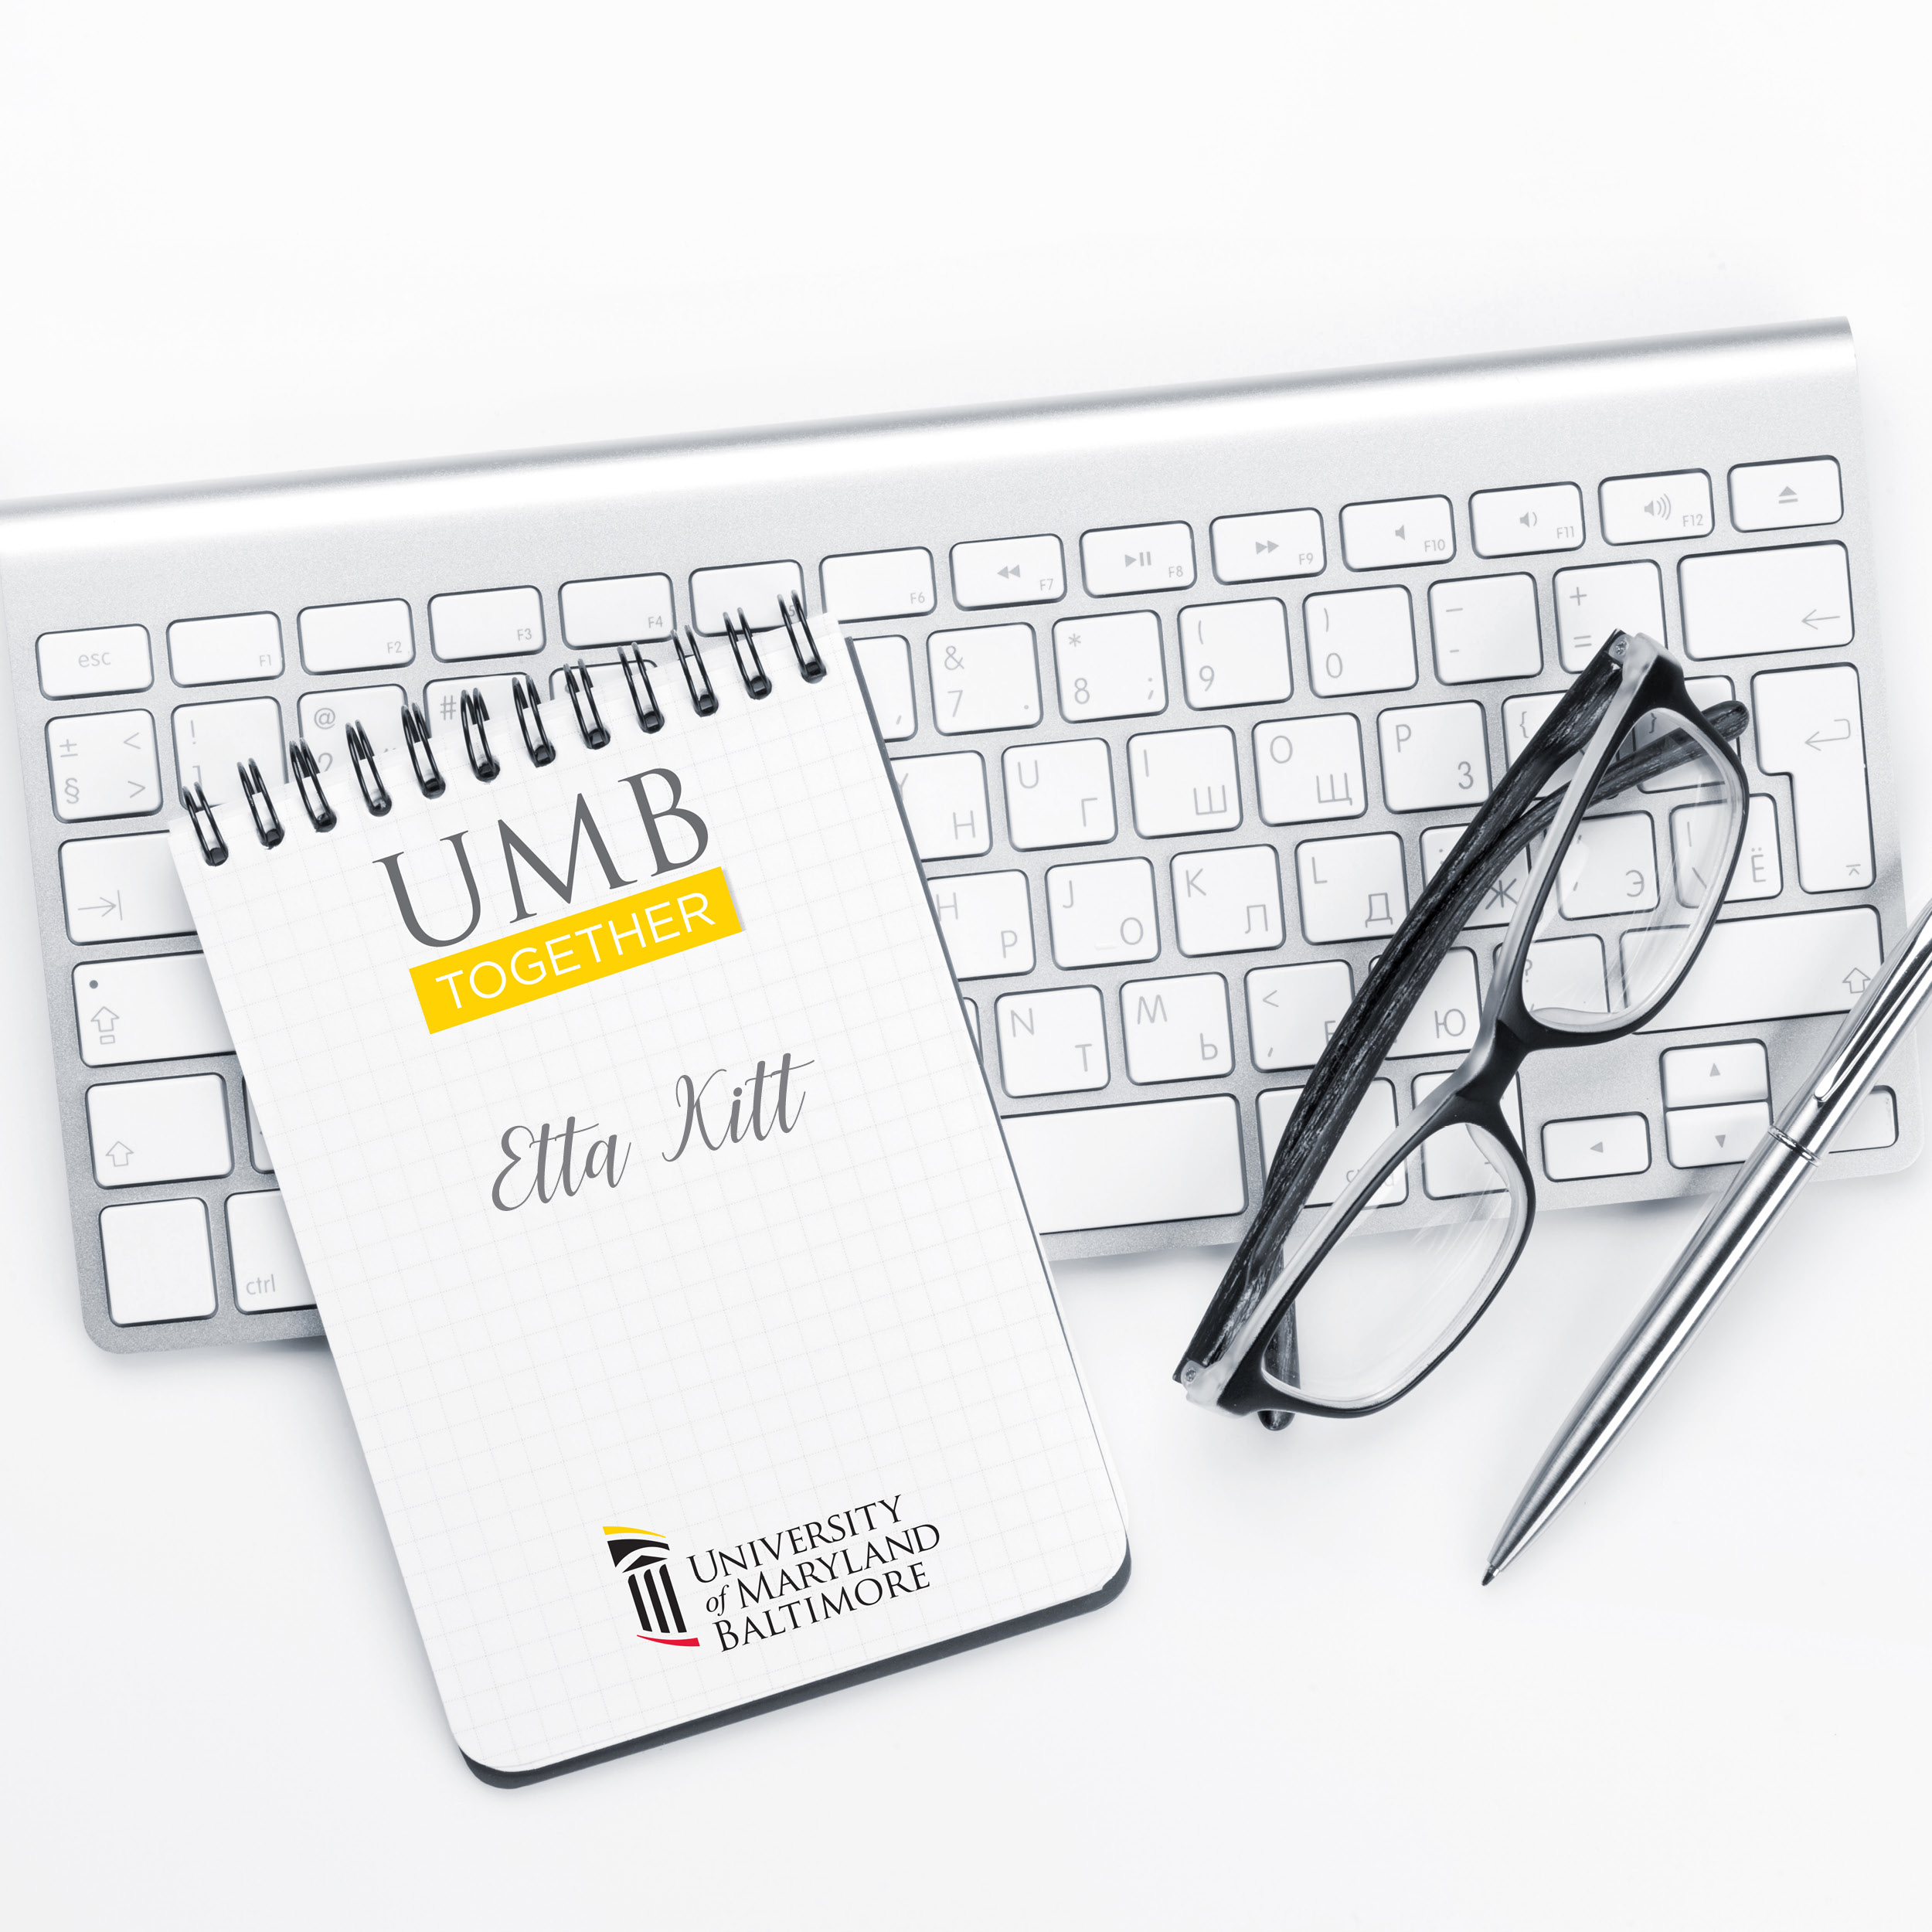 glasses and UMB Together notepad on top of keyboard